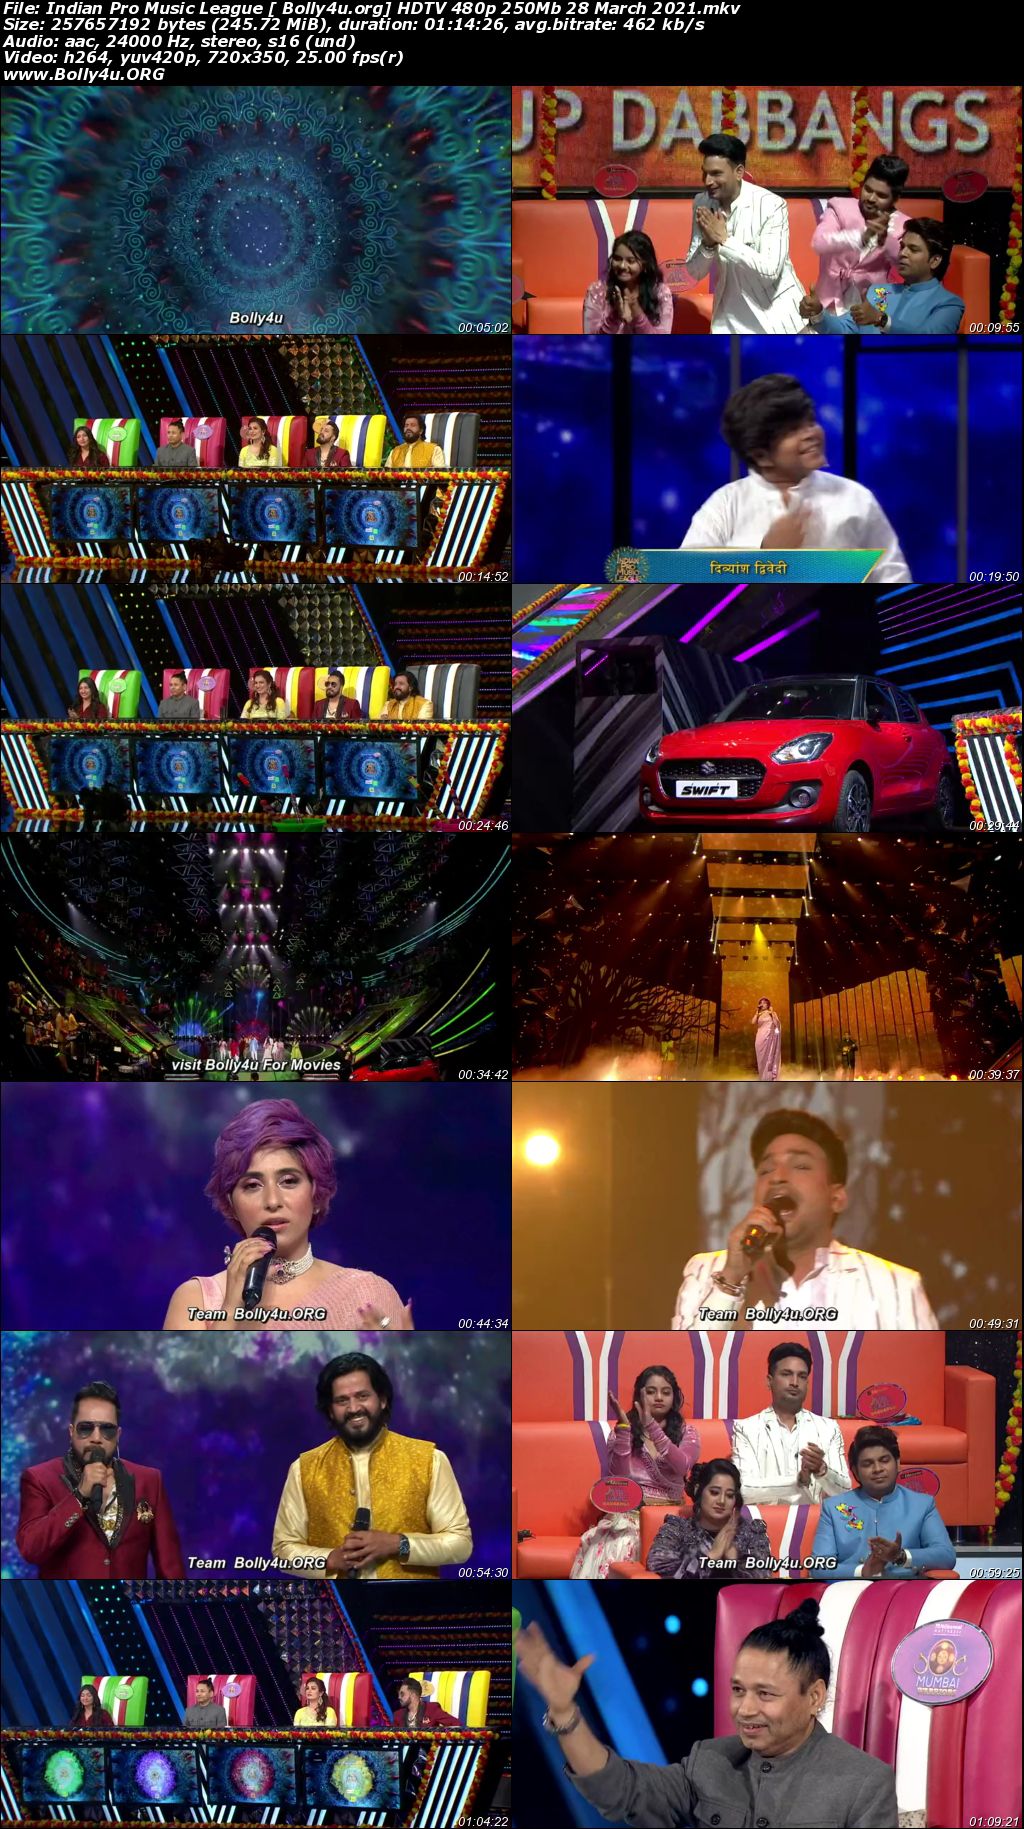 Indian Pro Music League HDTV 480p 250Mb 28 March 2021 Download